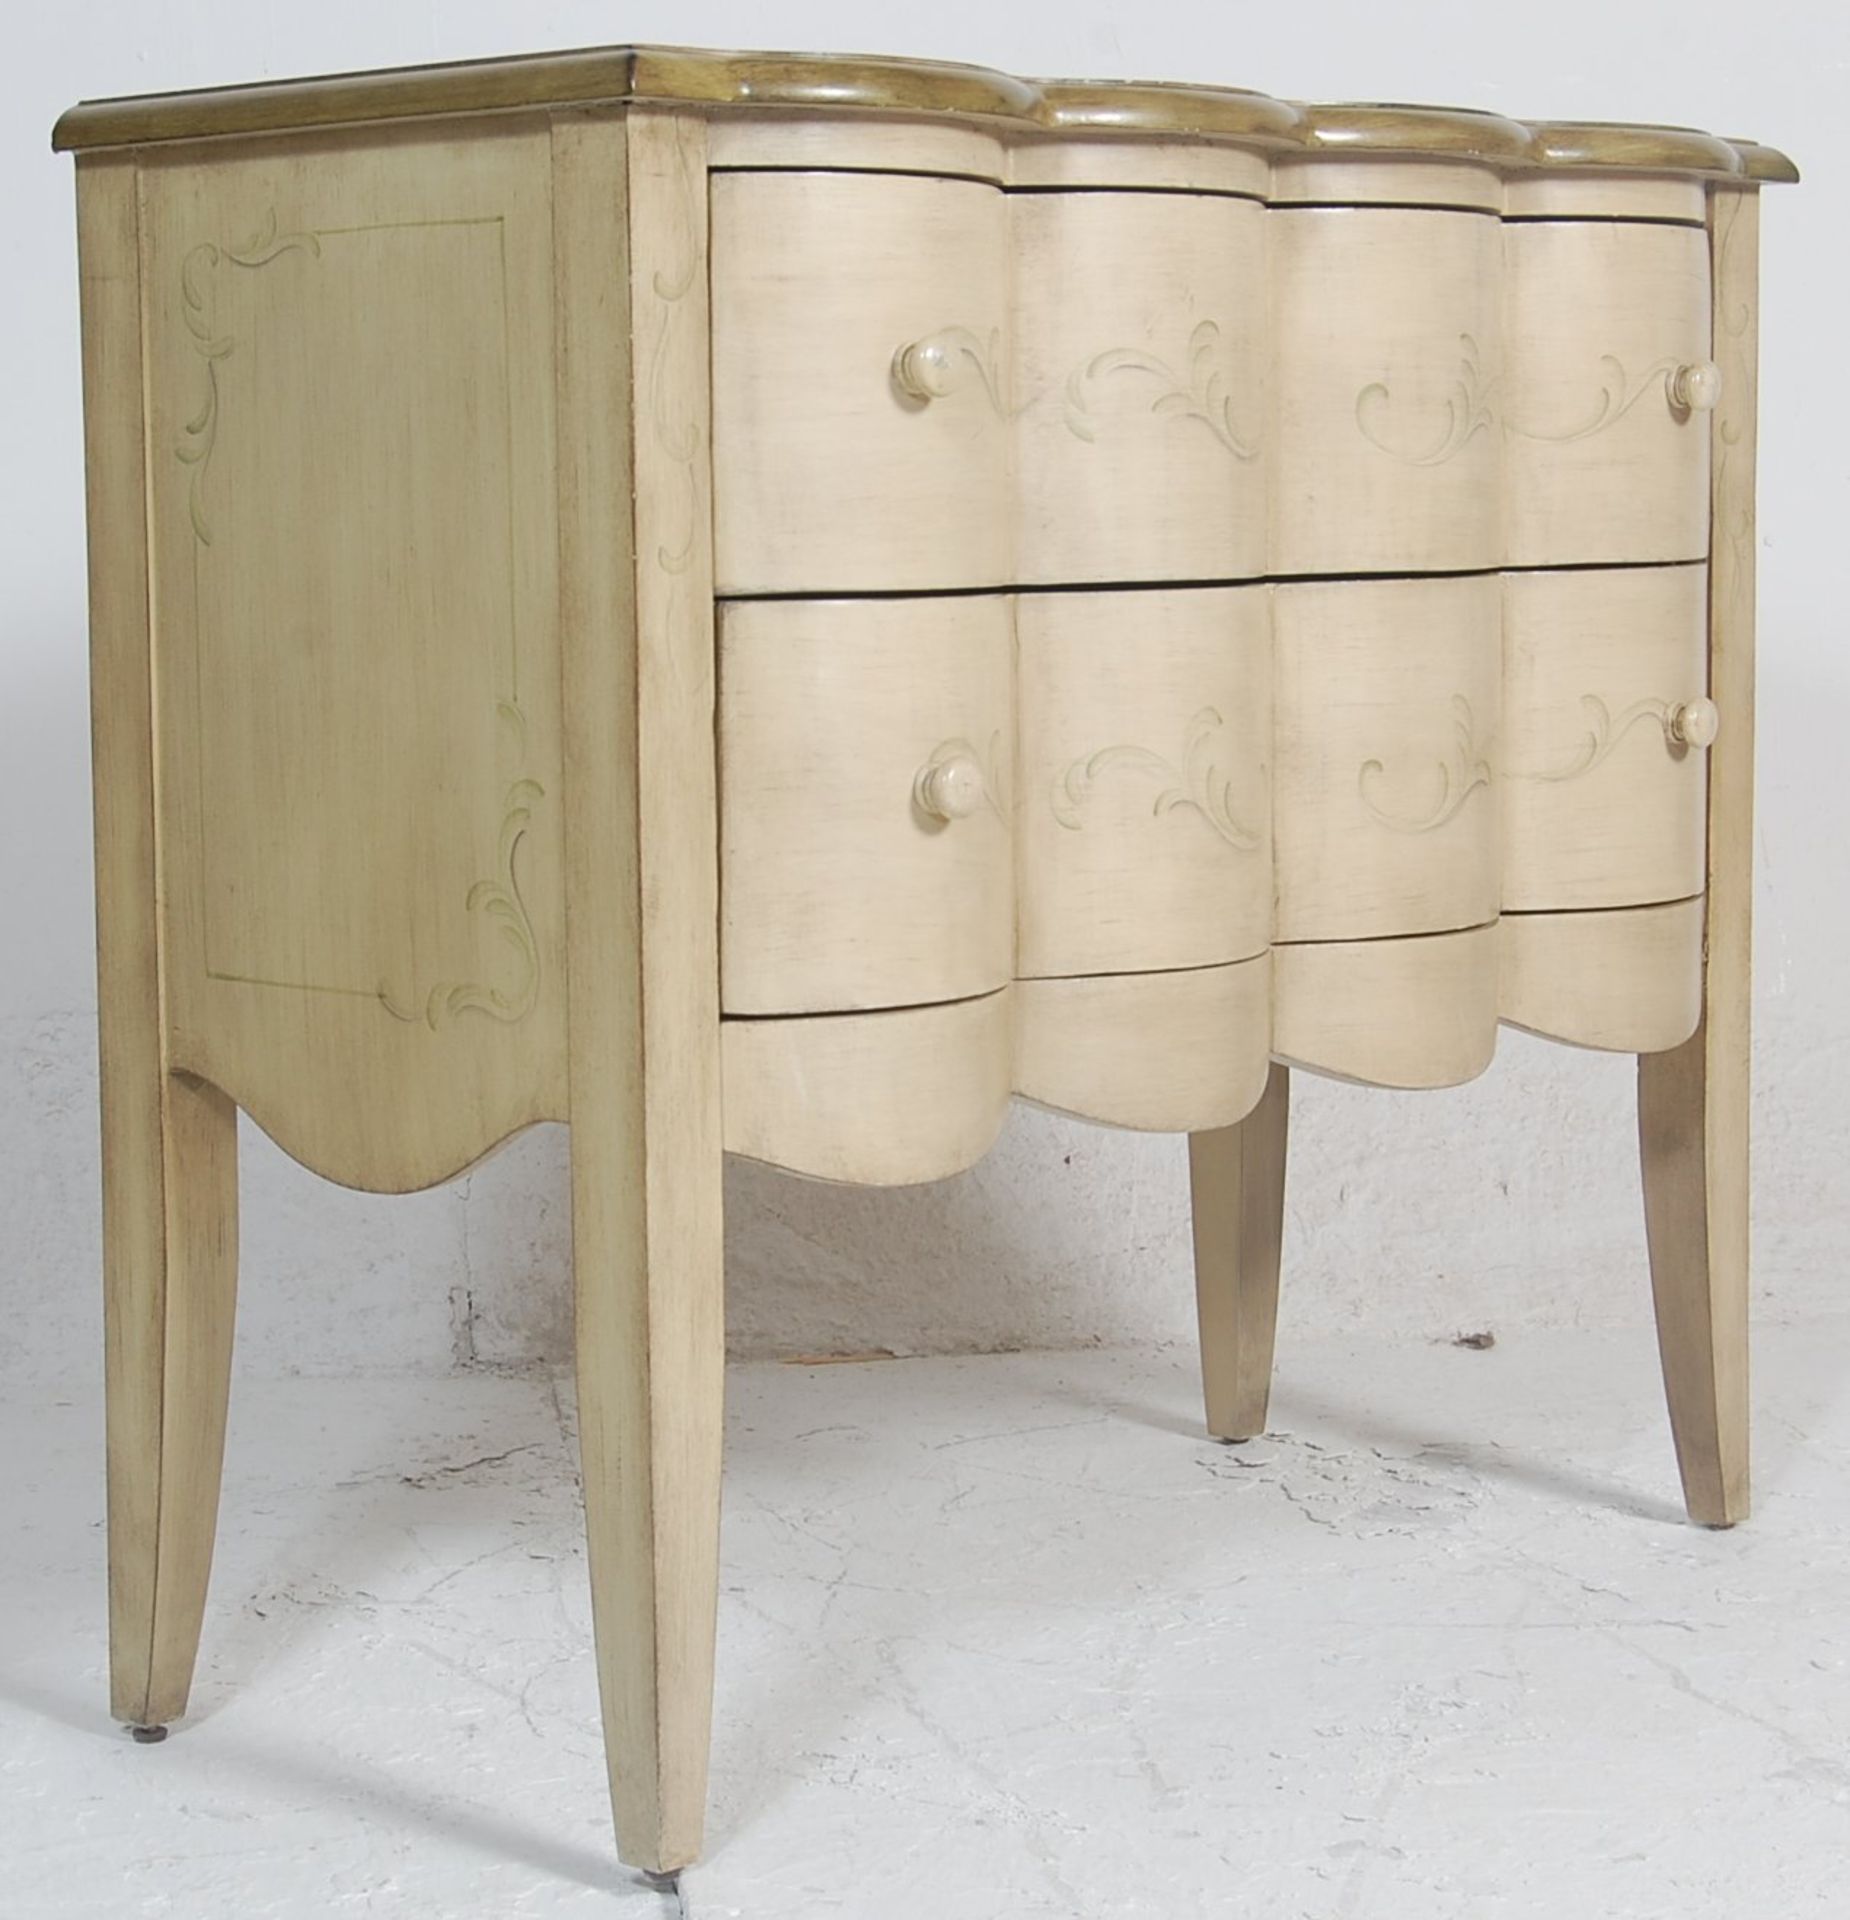 A 20th century Serpentine fronted French painted shabby chic commode chest of drawers. Raised on